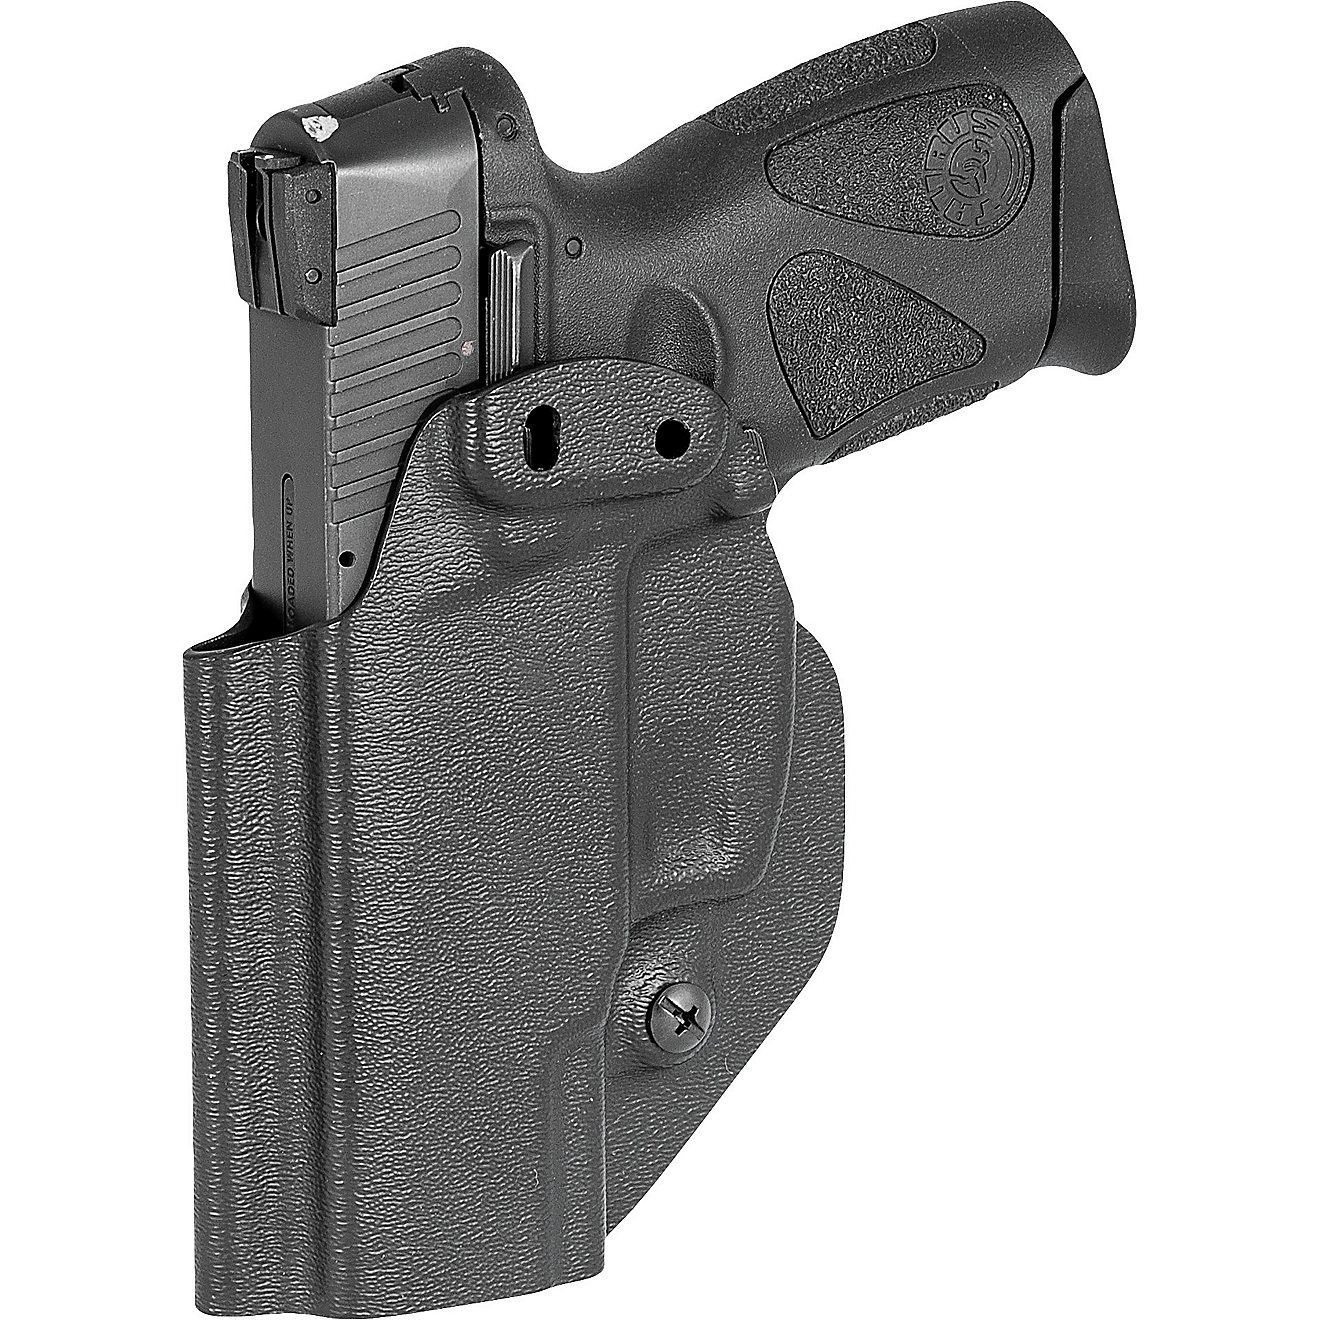 Details about   COMBO PACK IWB OWB RH LH Gun Holster & Mag For Taurus PT140 G2 